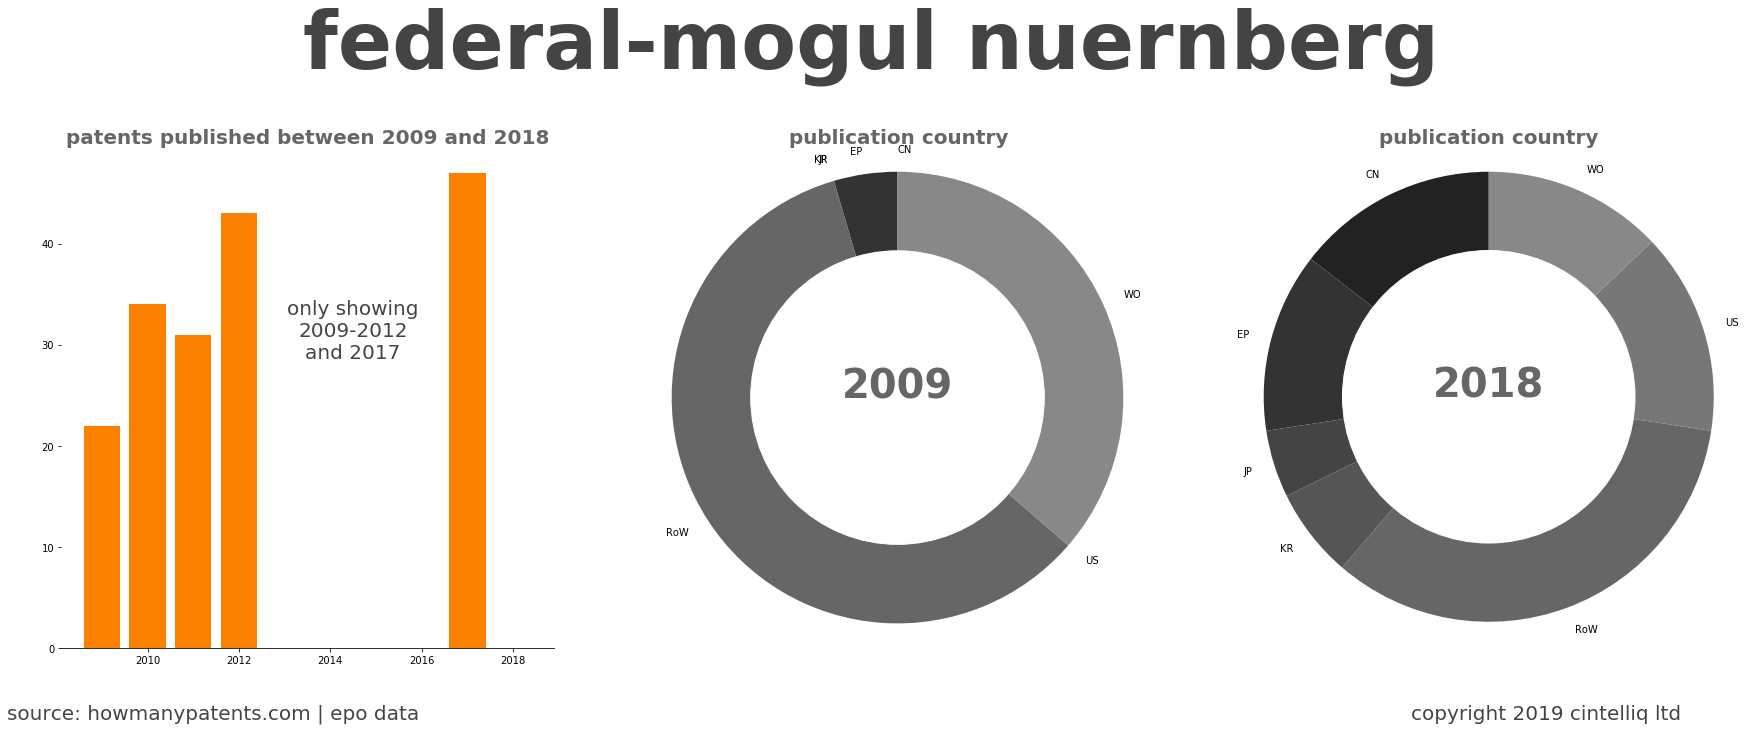 summary of patents for Federal-Mogul Nuernberg